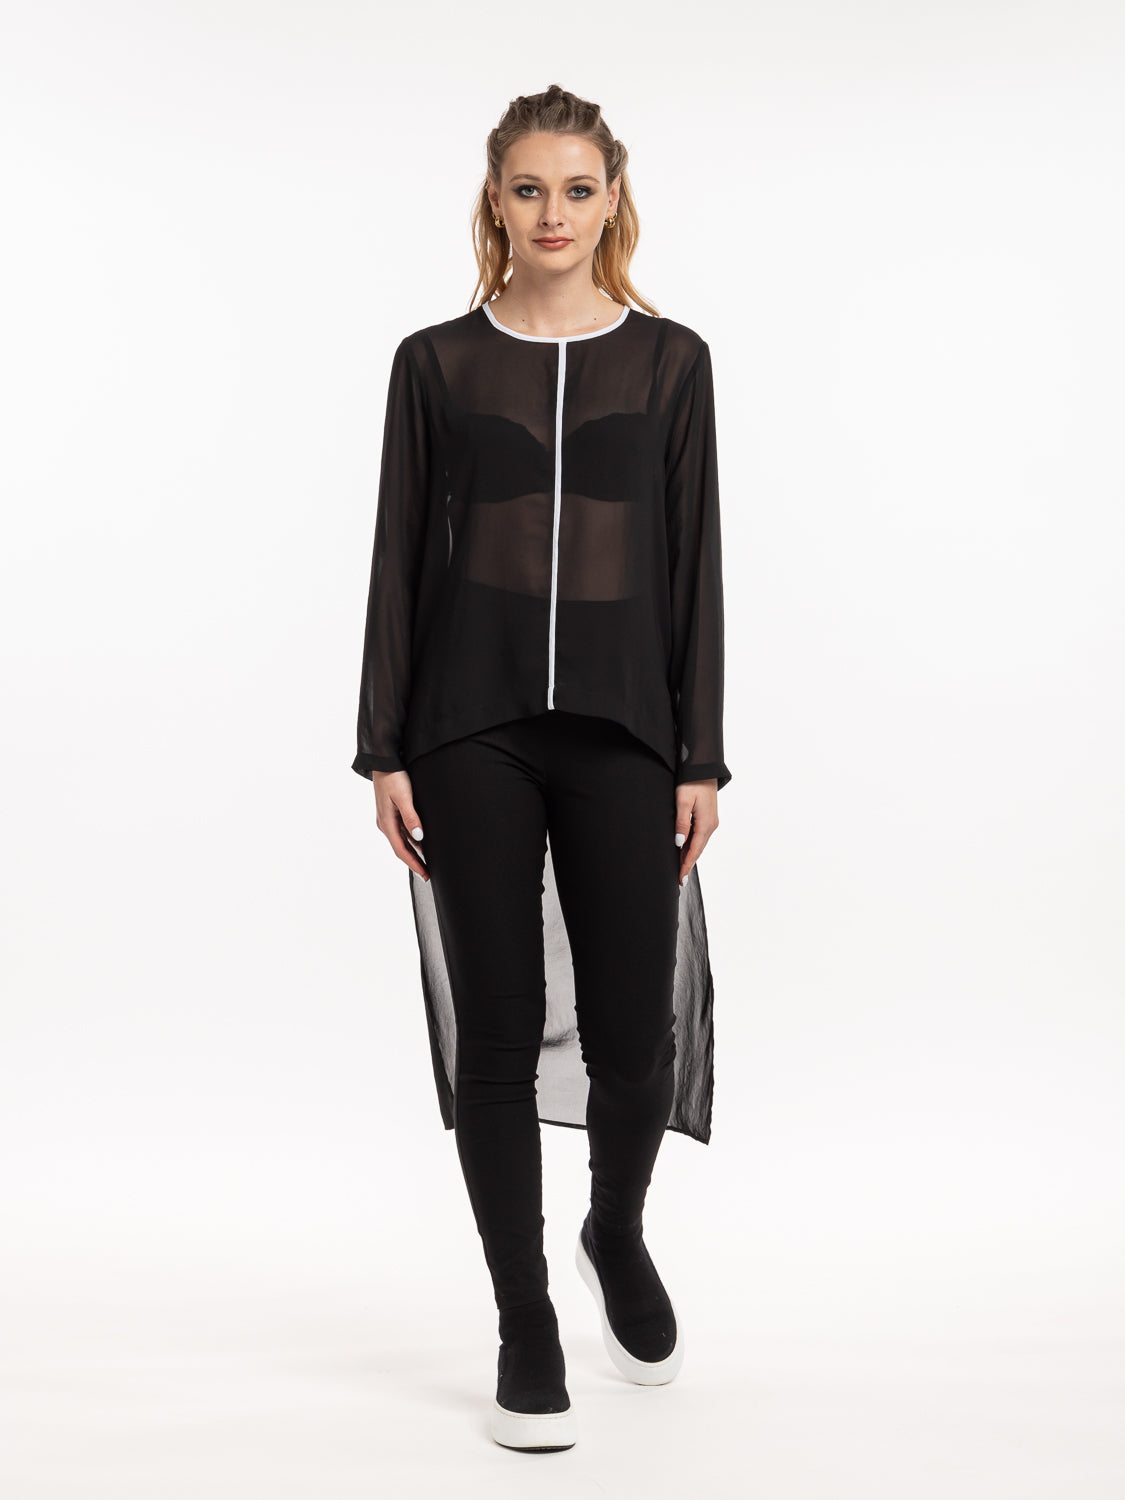 STYLE X LAB MIDNIGHT FROST TOP - BLACK - THE VOGUE STORE